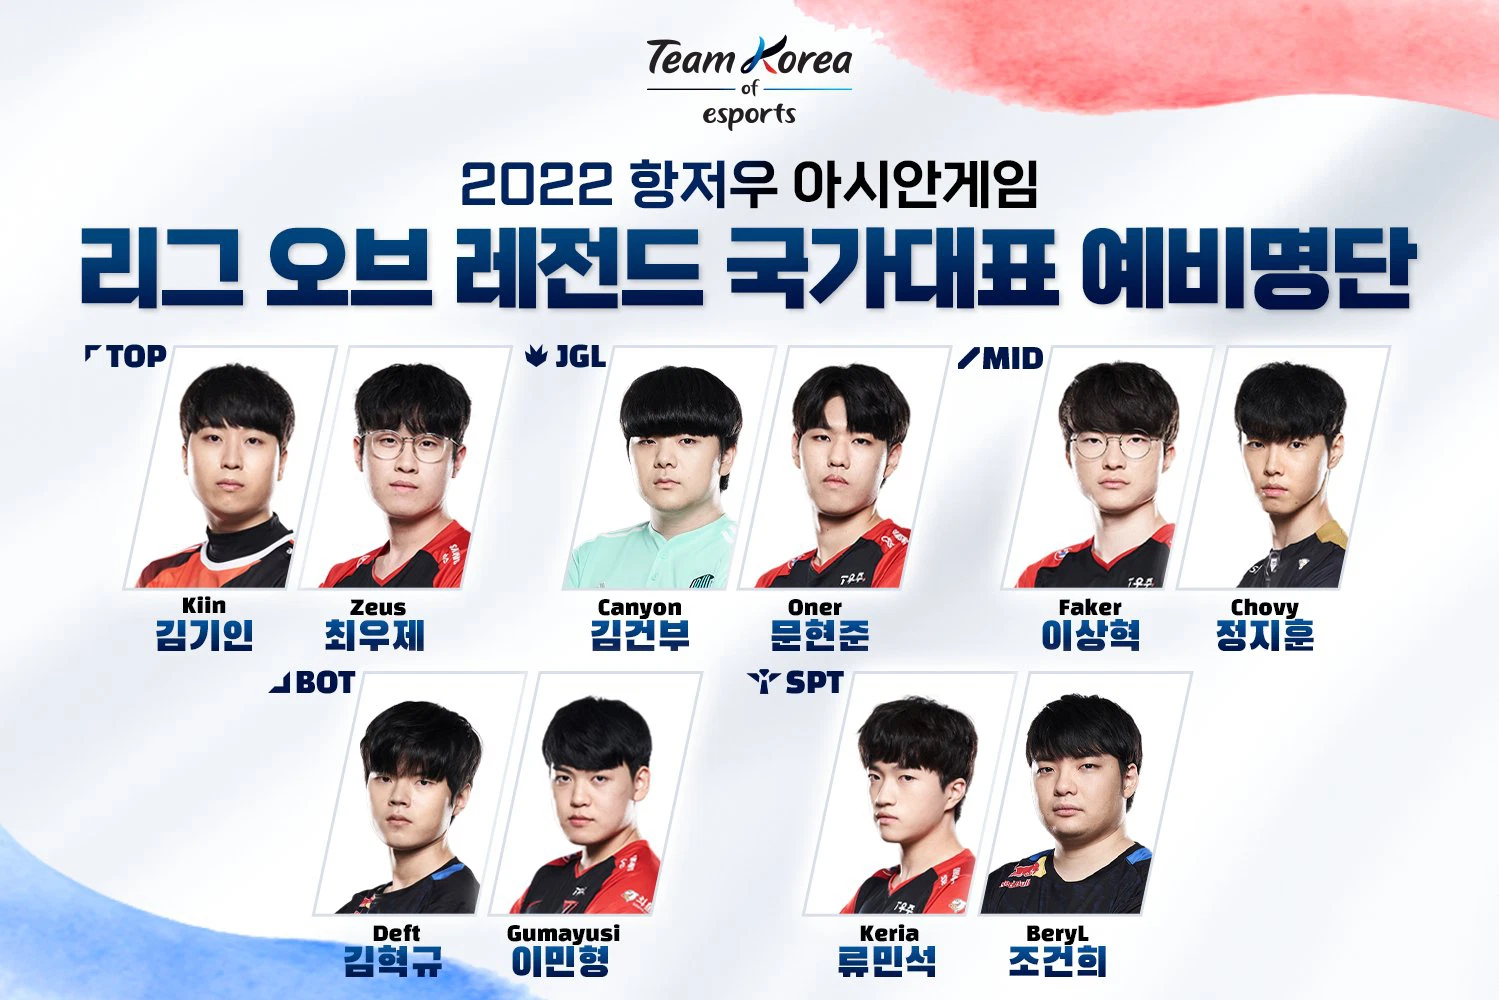 Is there news that Coach kkOma has resigned from the Korean League of